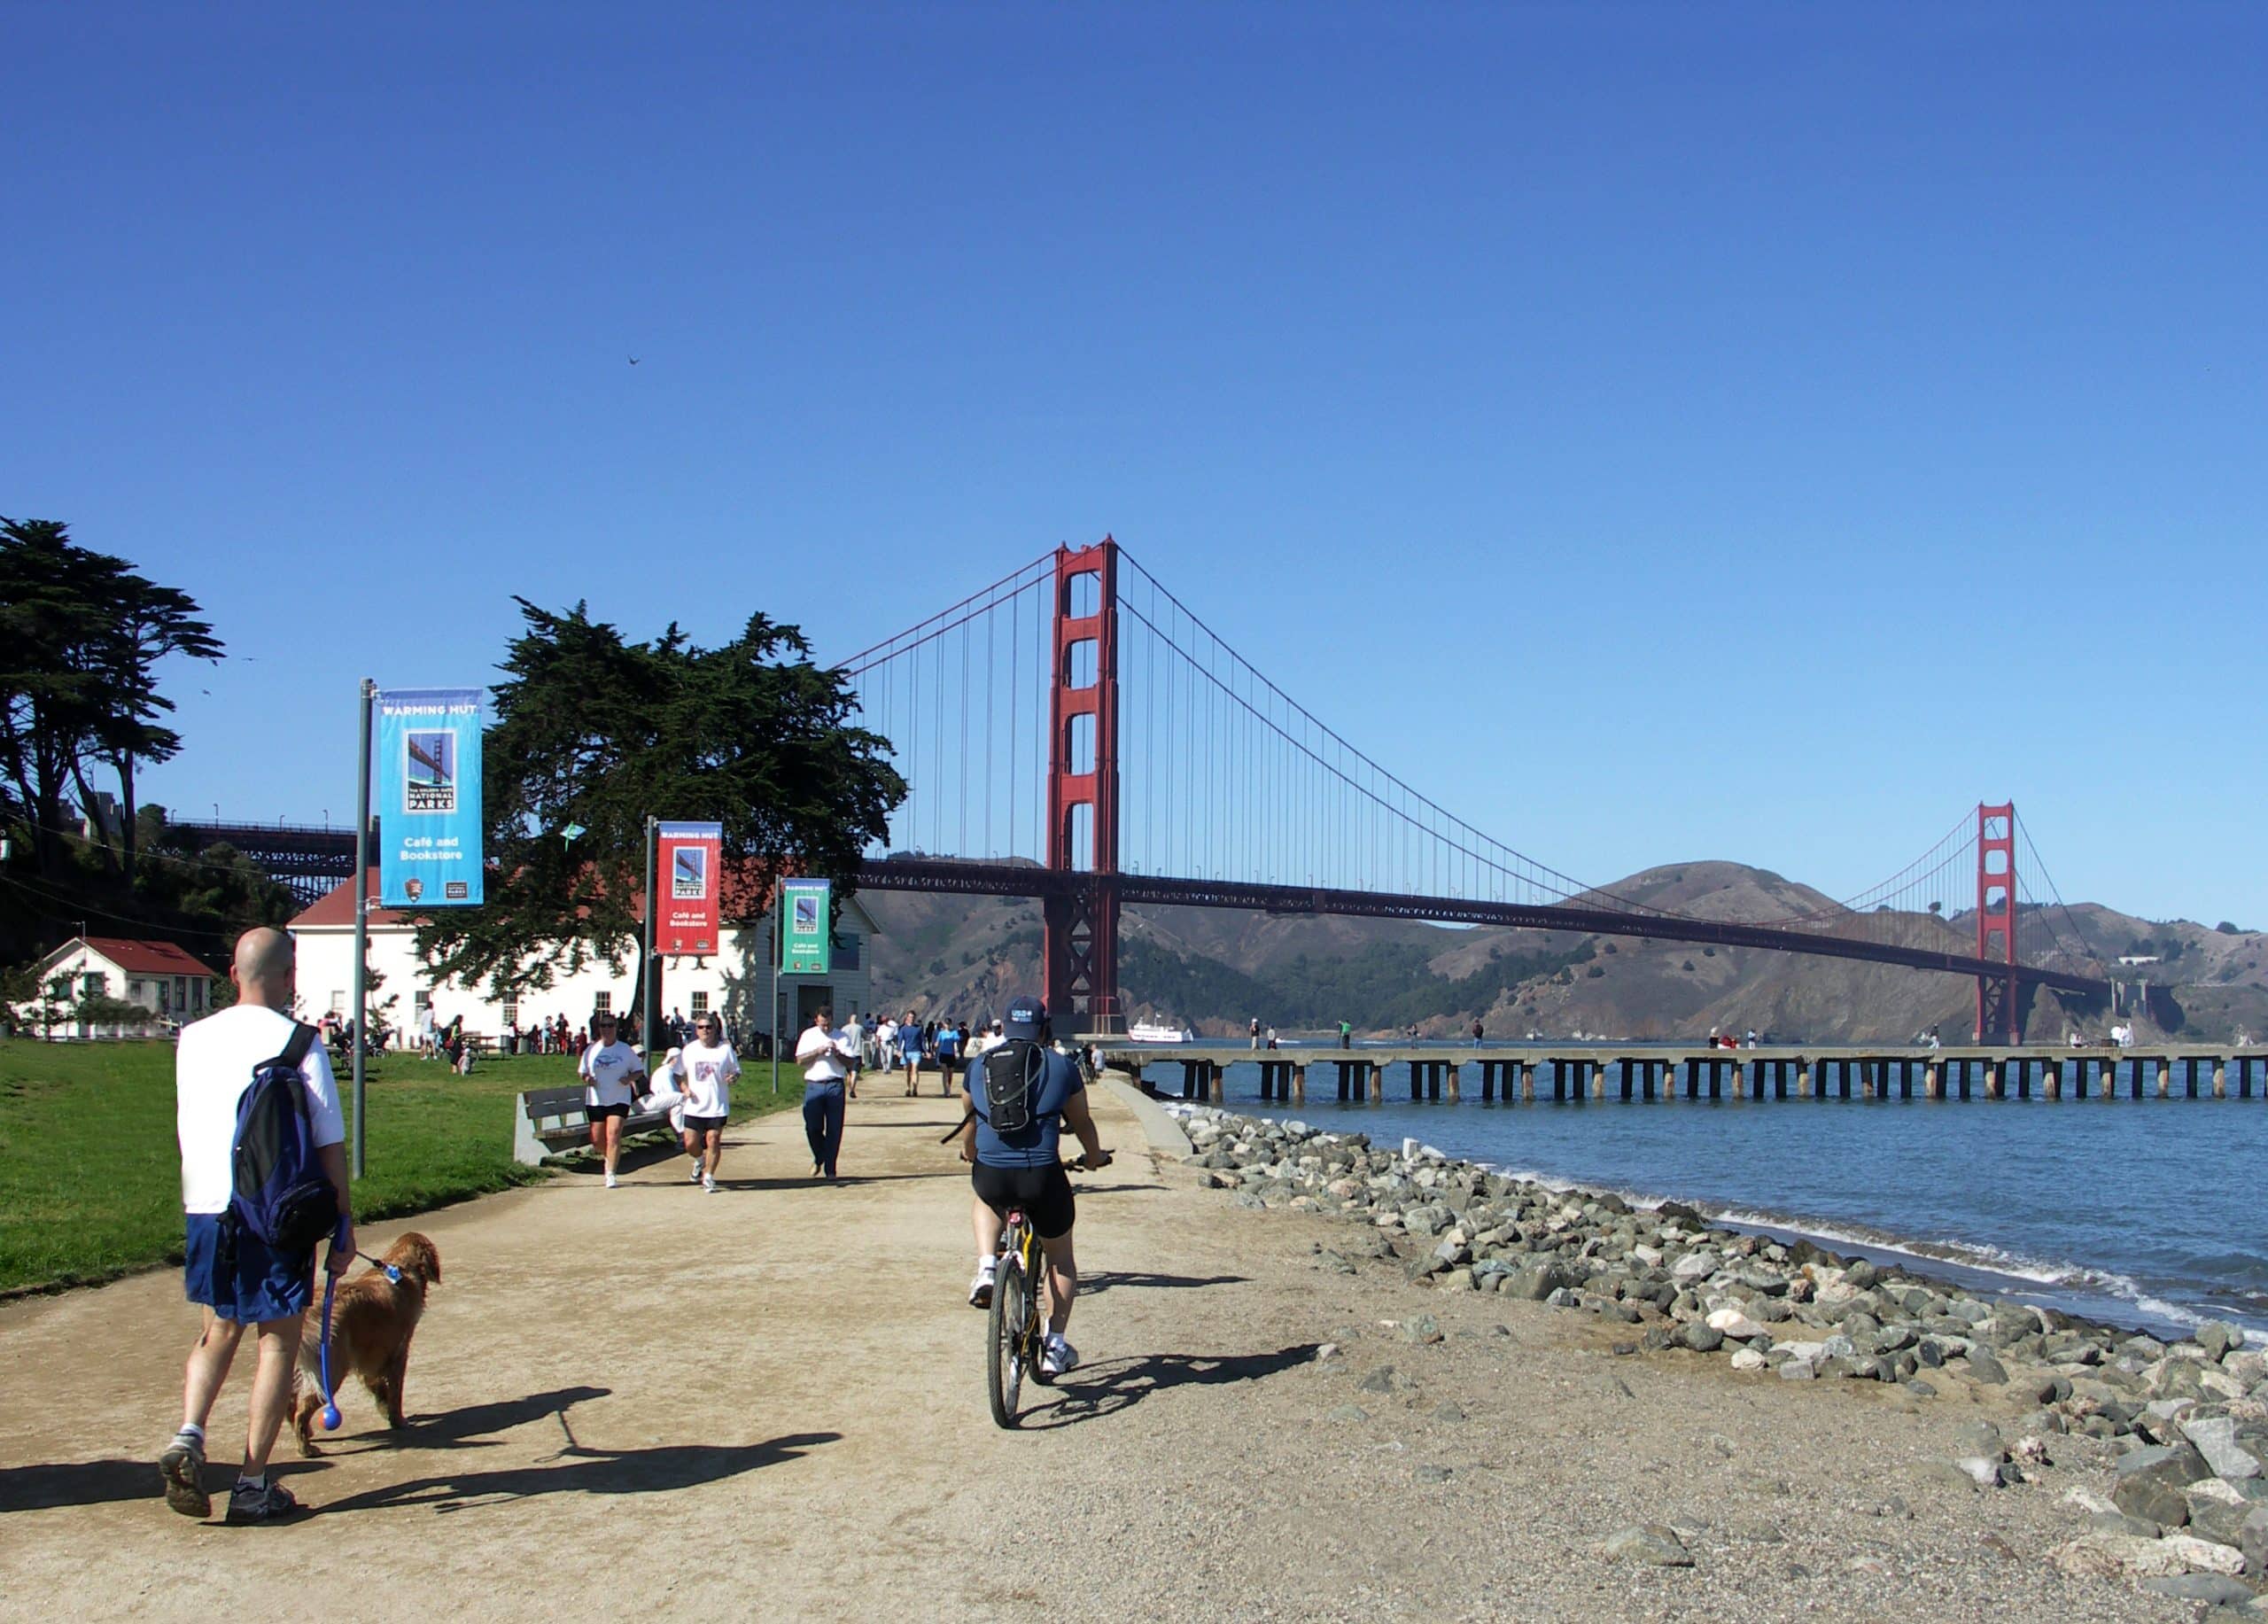 Come one, come all: Join the Paubox Team for Crissy Field beach clean up on Thursday February 13th